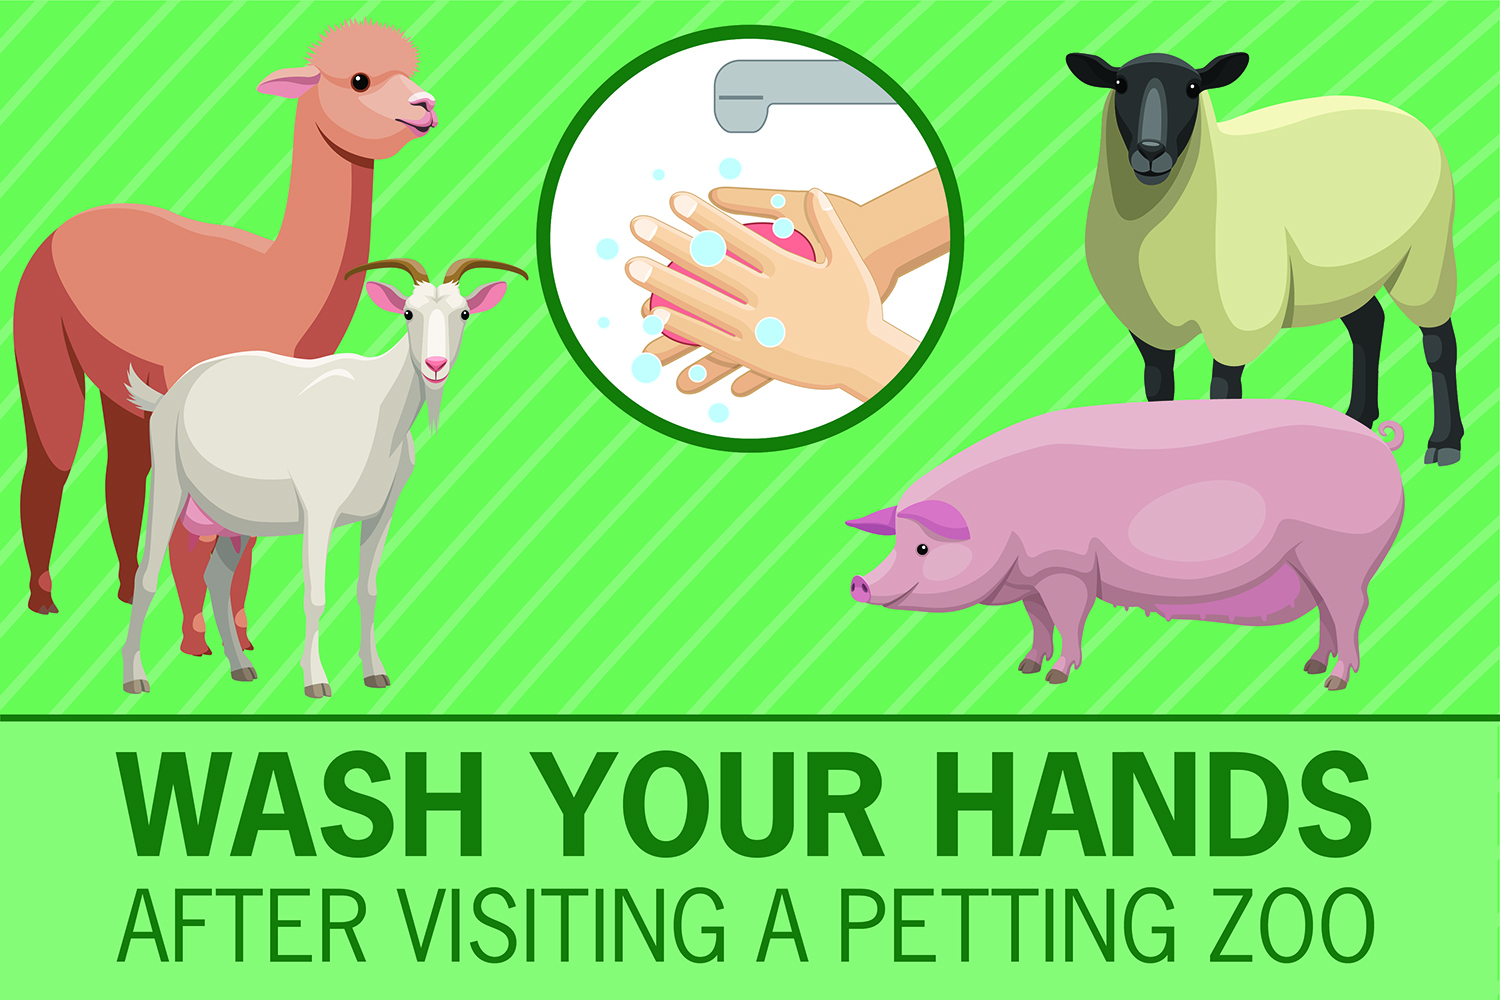 Always Wash Your Hands After Visiting a Petting Zoo Sticker